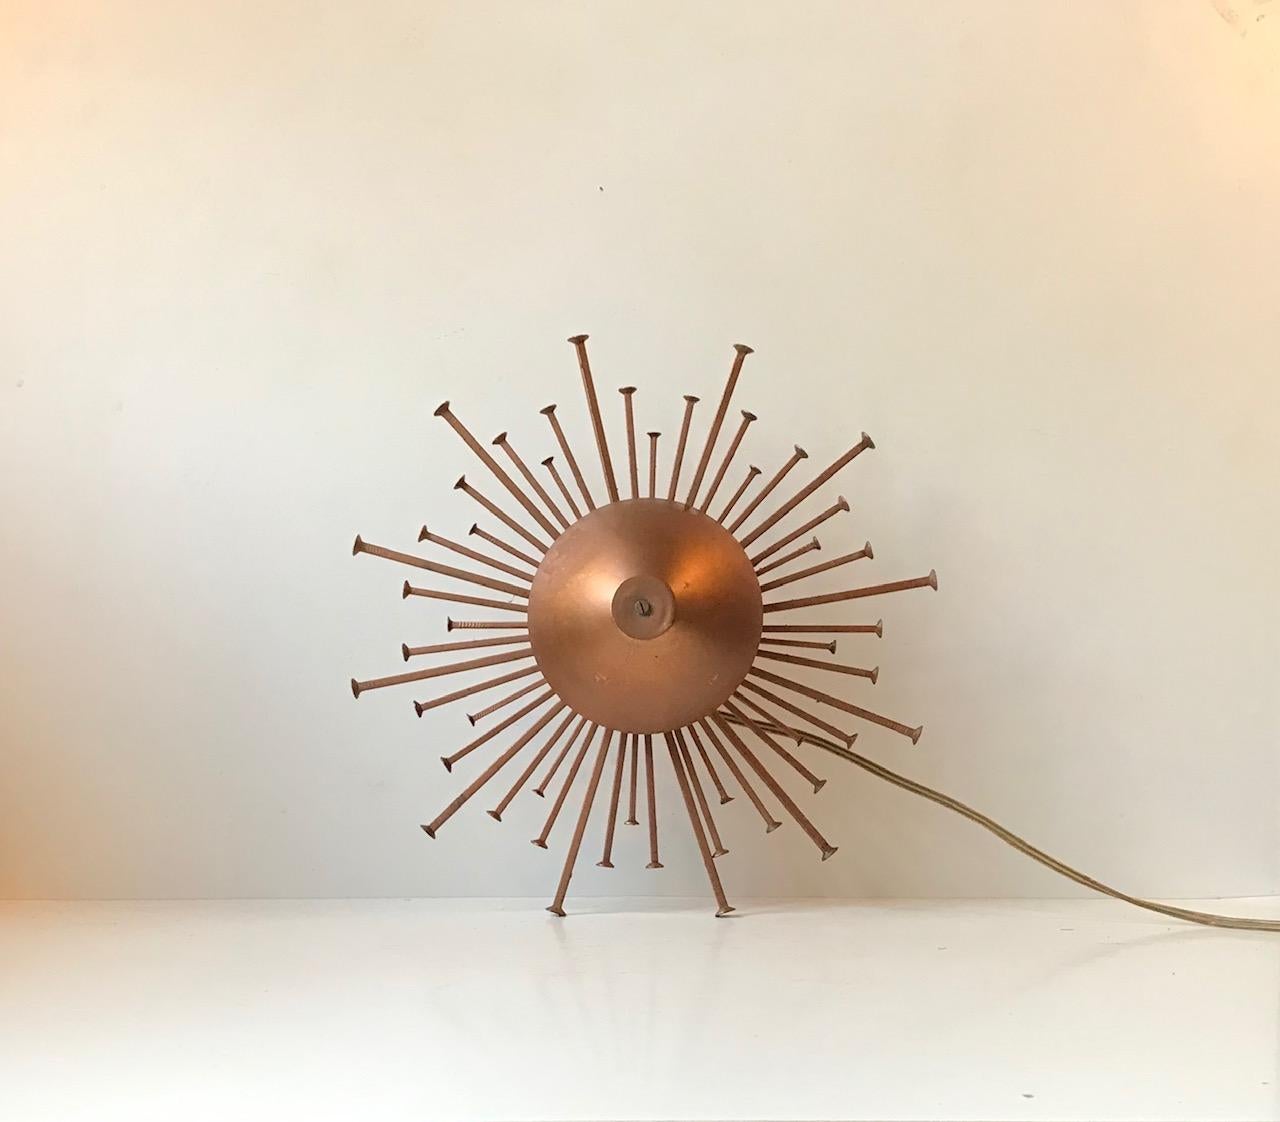 Sculptural iron sconce depicting a bursting sun or star. Lacquered with copper powder coating. Manufactured and designed in Denmark by Dantoft during the 1970s.